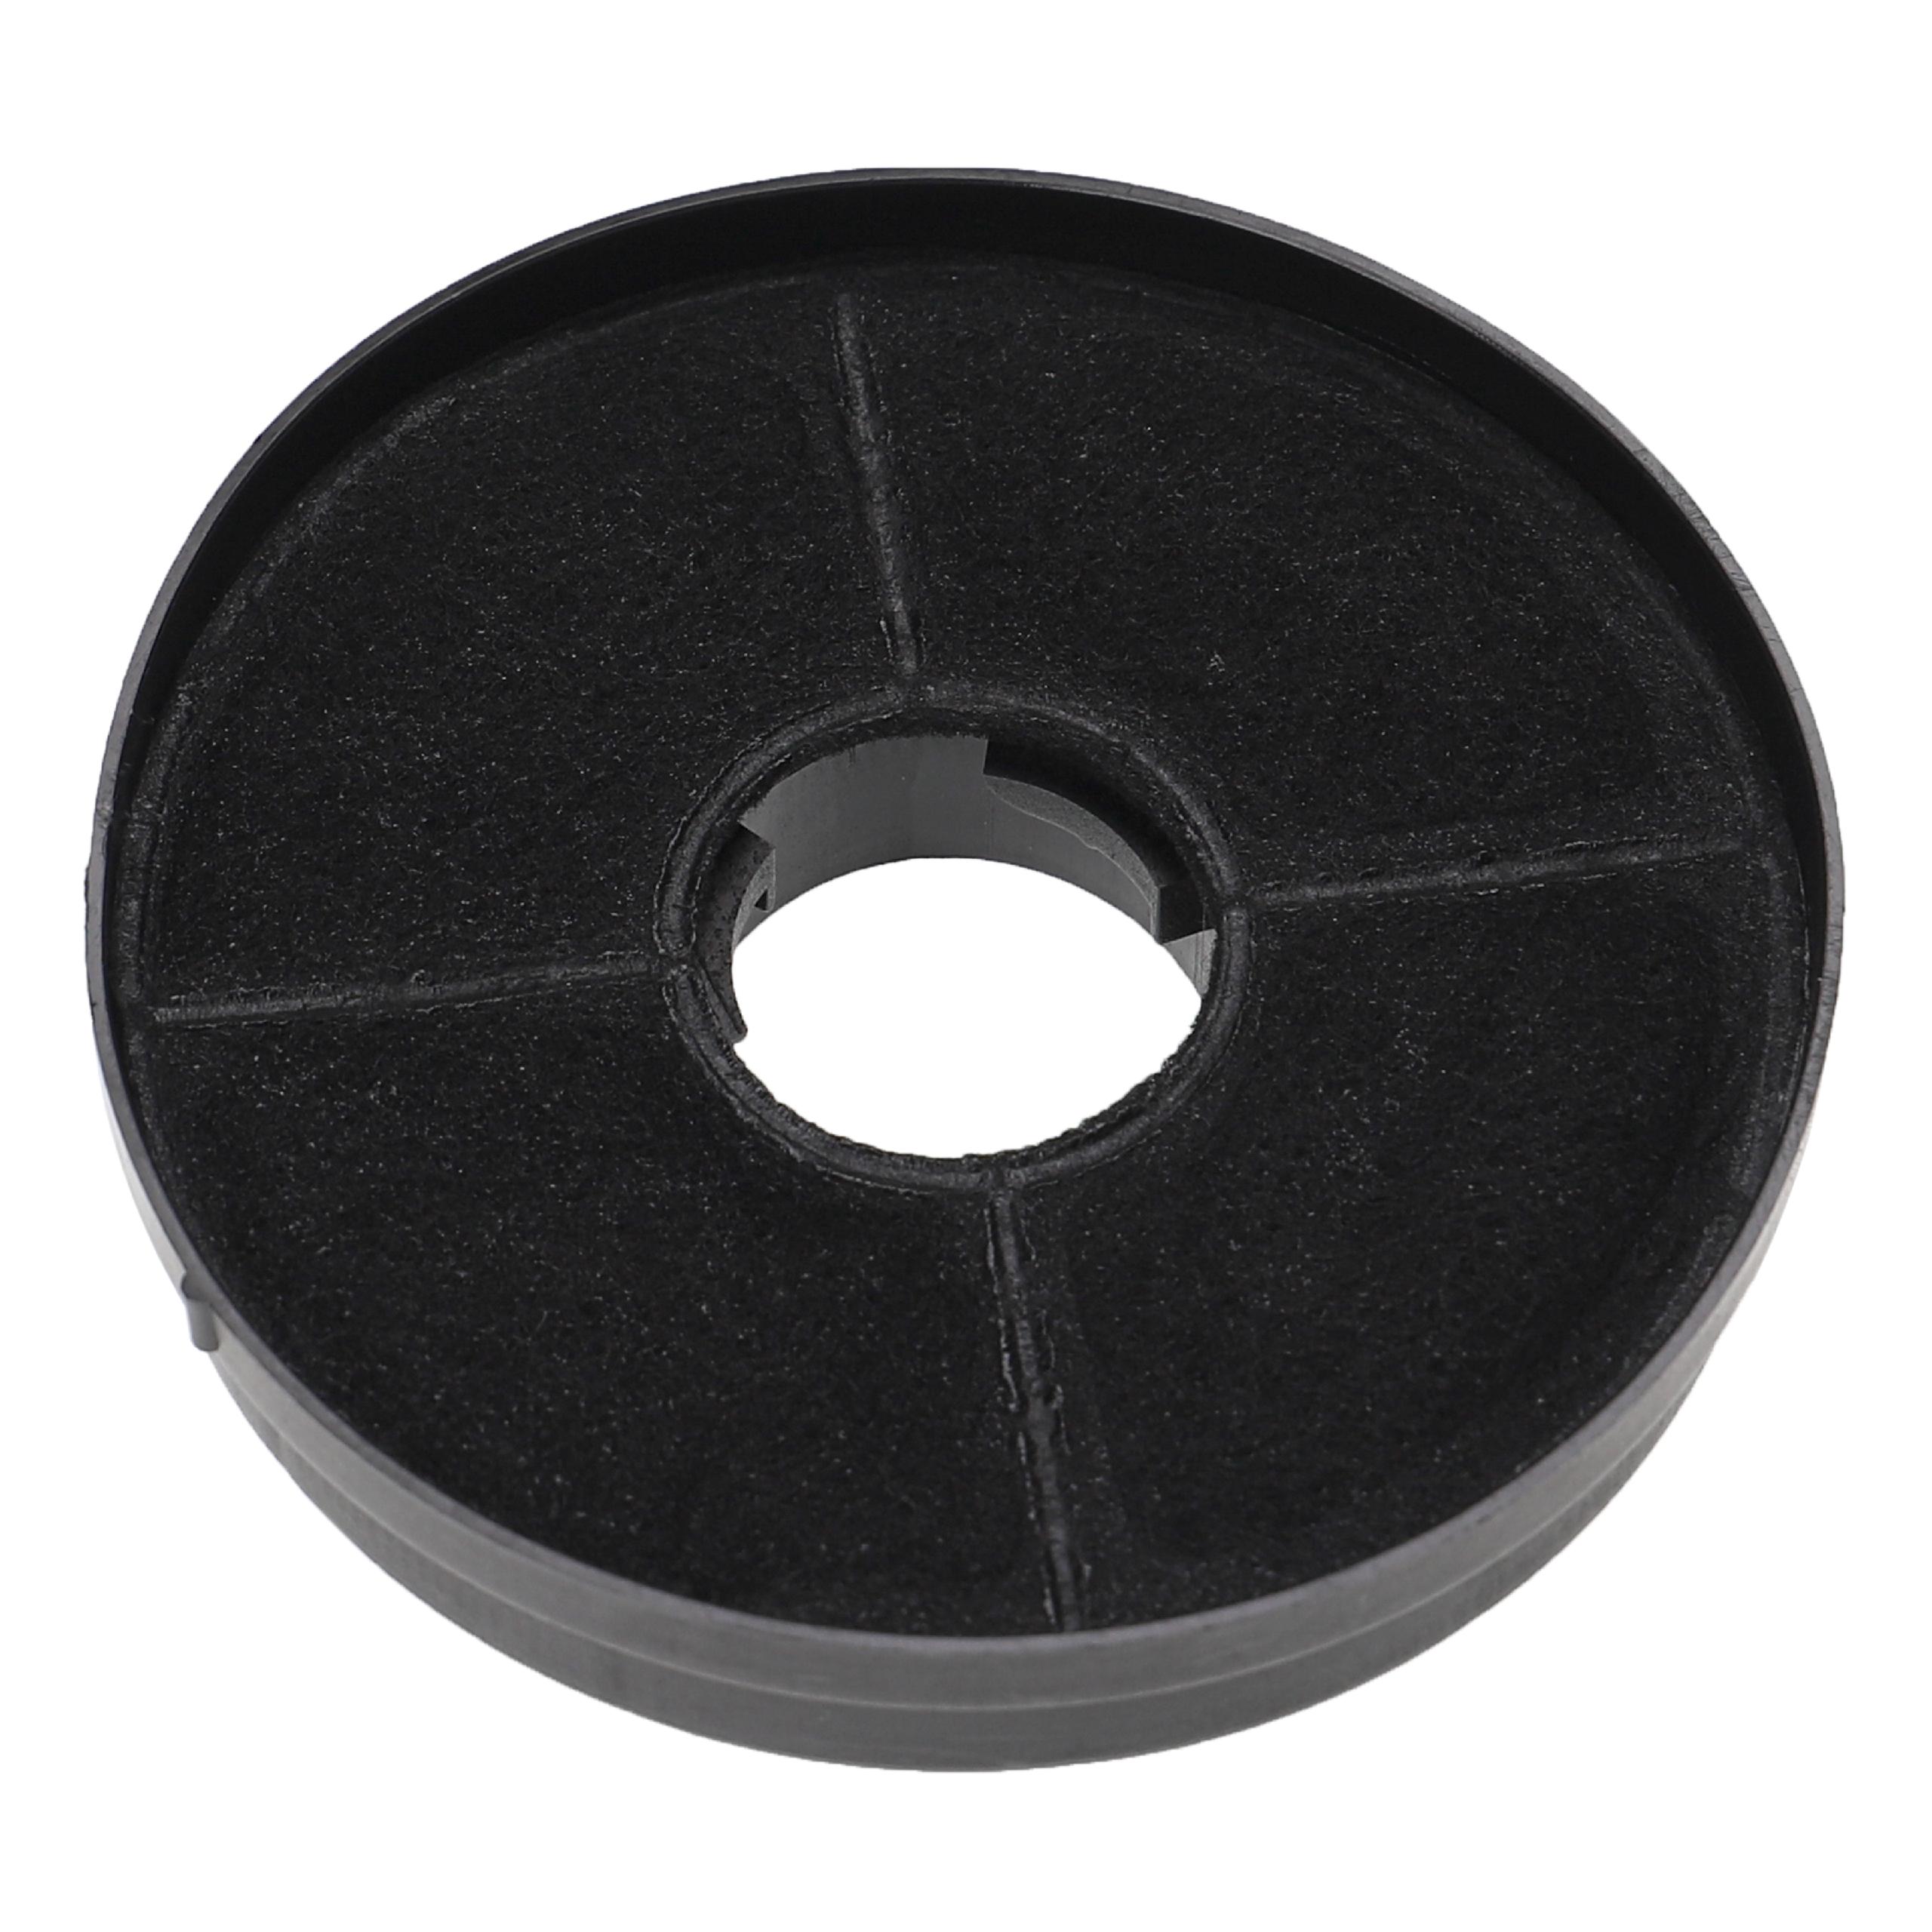 Activated Carbon Filter as Replacement for Bomann KF563 for Bomann Hob etc. - 10.5 cm